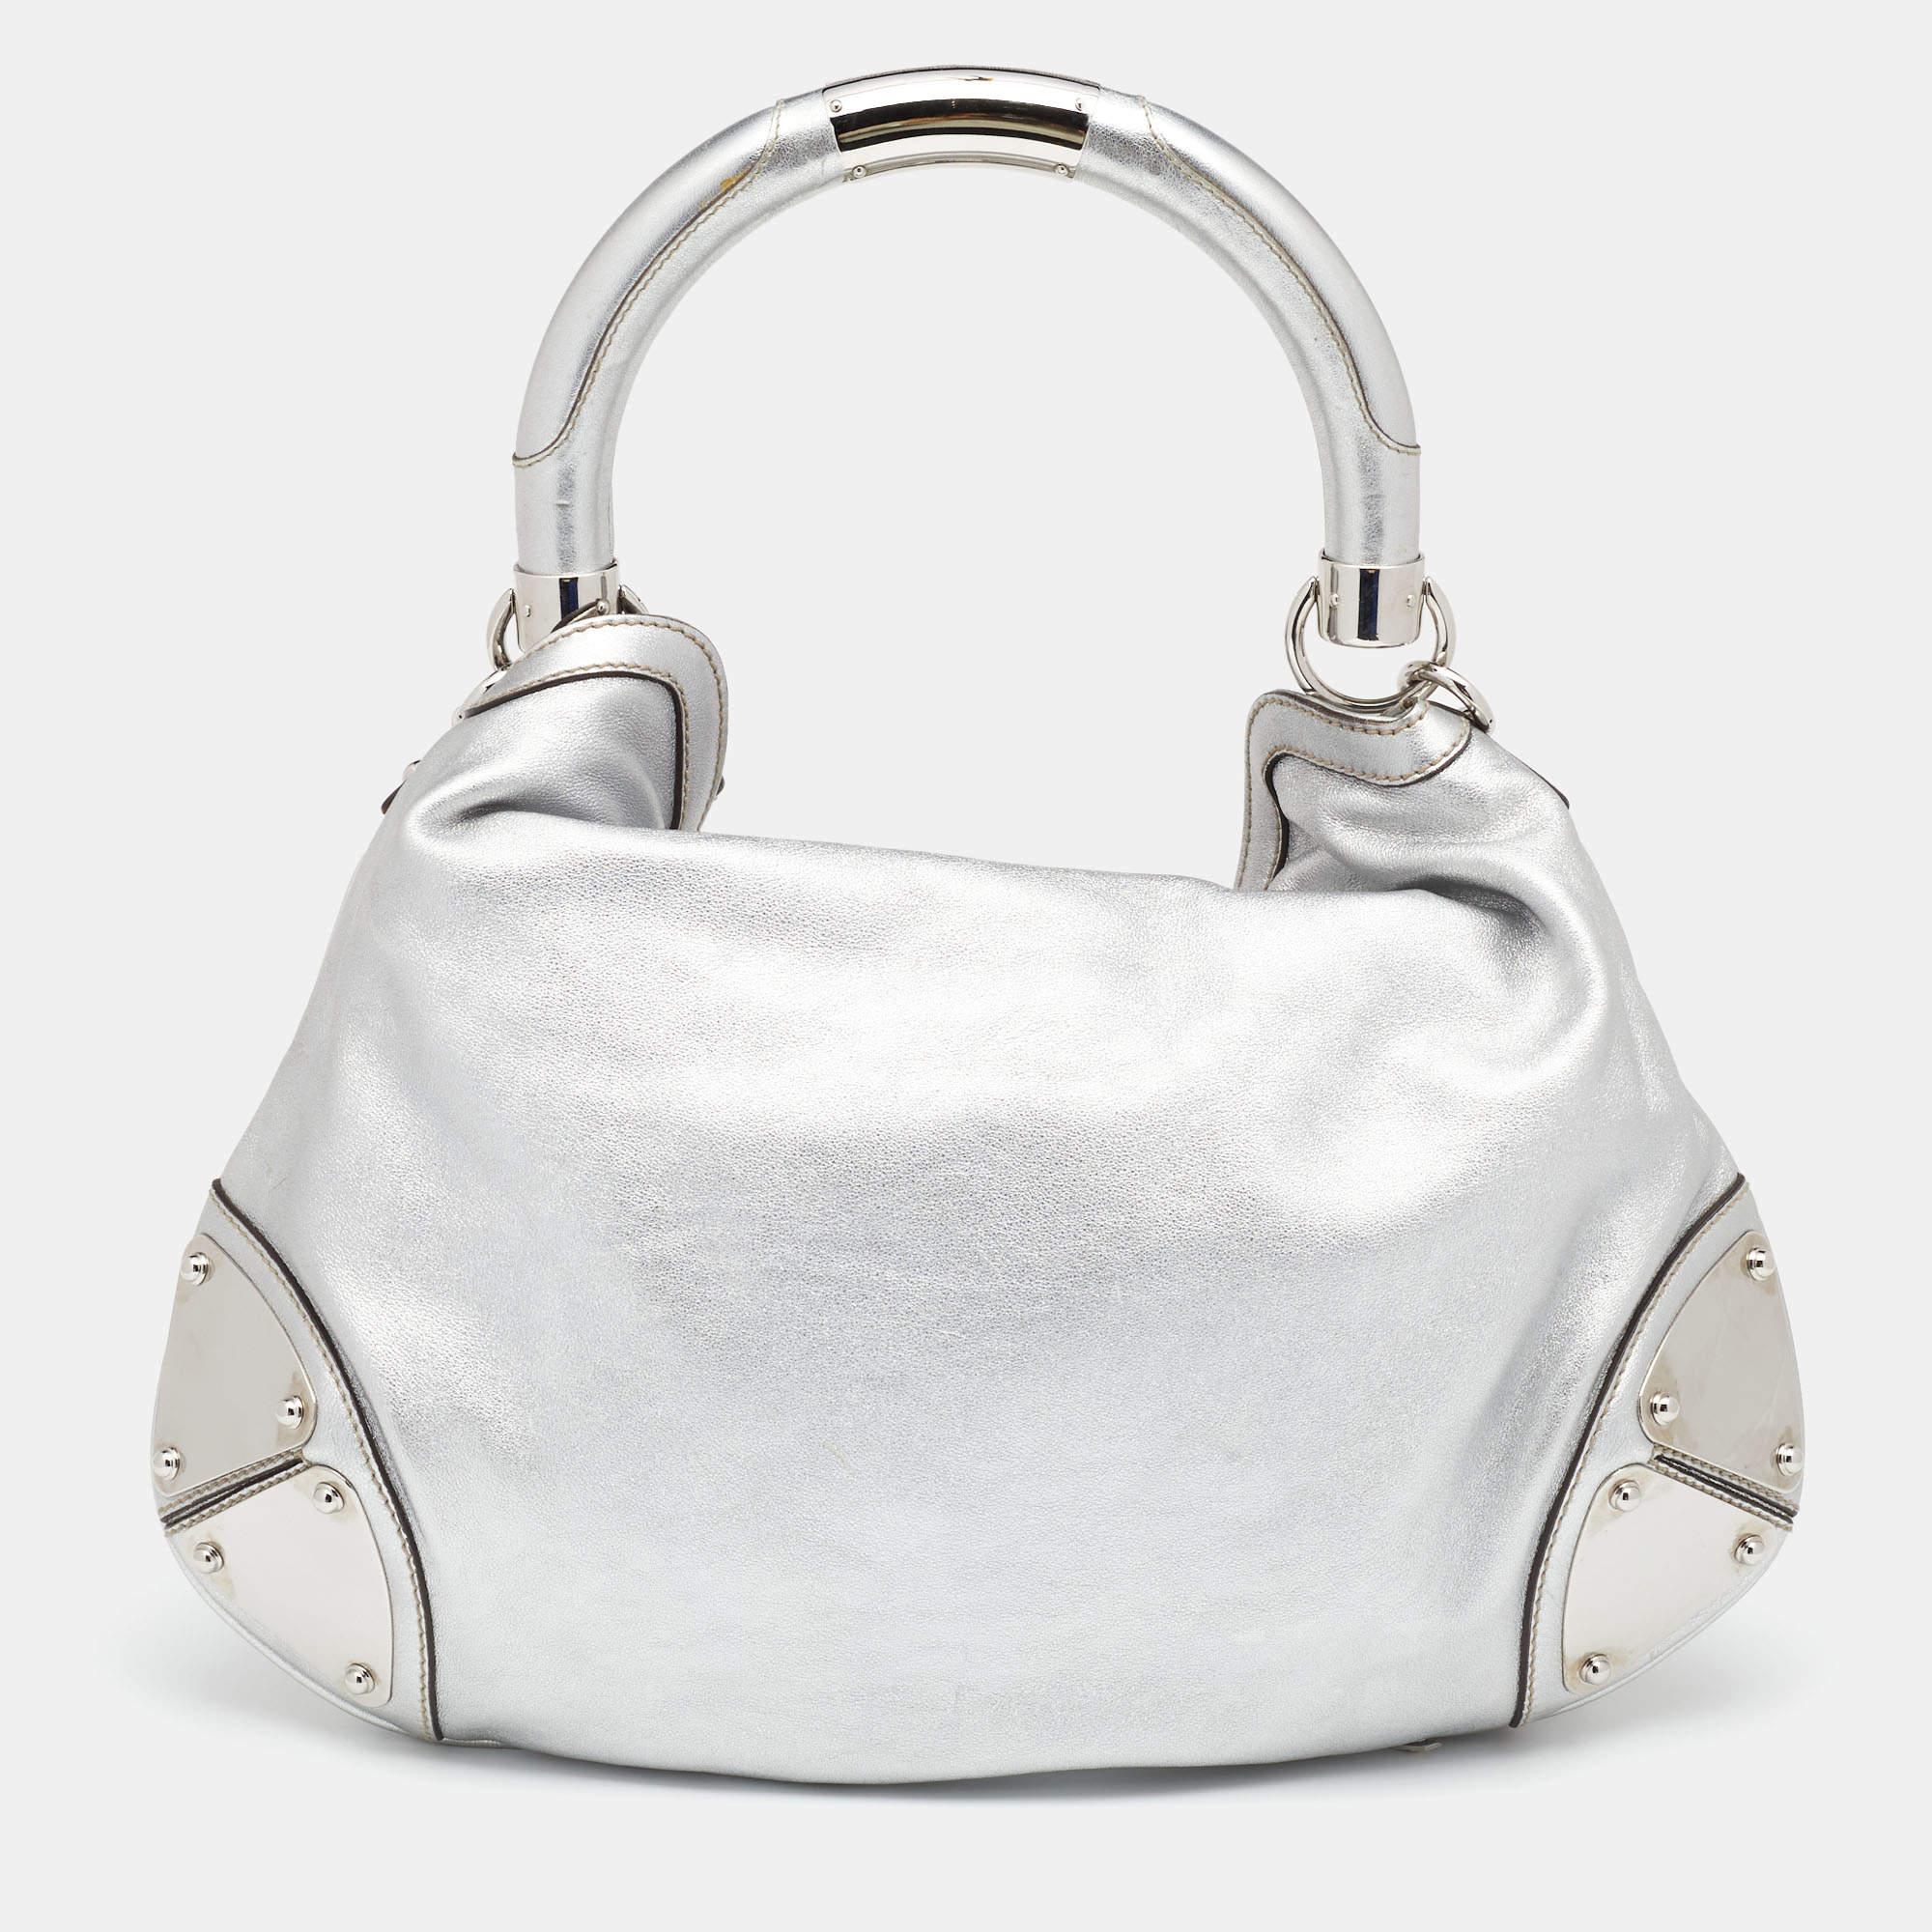 This Gucci Babouska Indy creation might just become the most loved classic bag in your closet. Crafted from metallic silver leather, it has silver-tone metal accents and the signature tassel detail at the front. The bag is equipped with a single